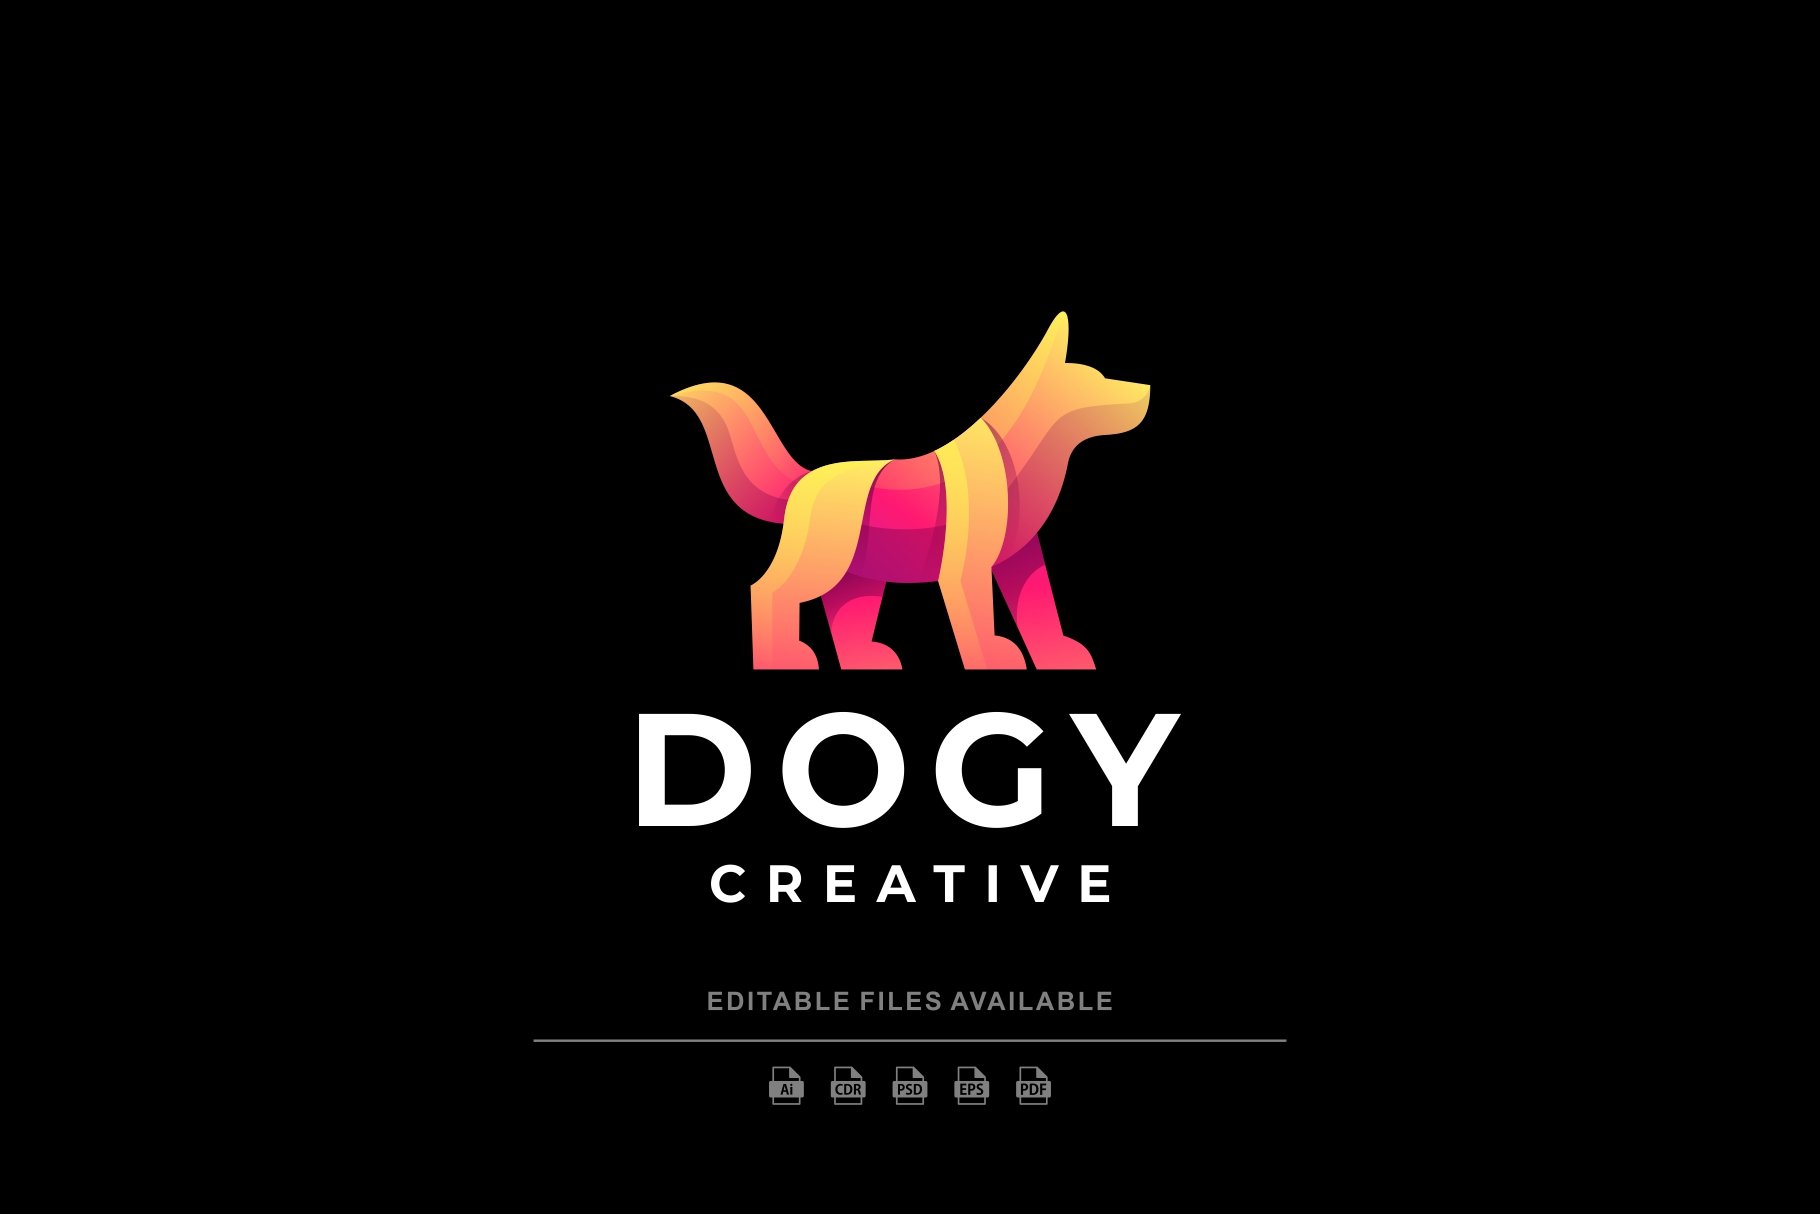 Dog Gradient Colorful Logo cover image.